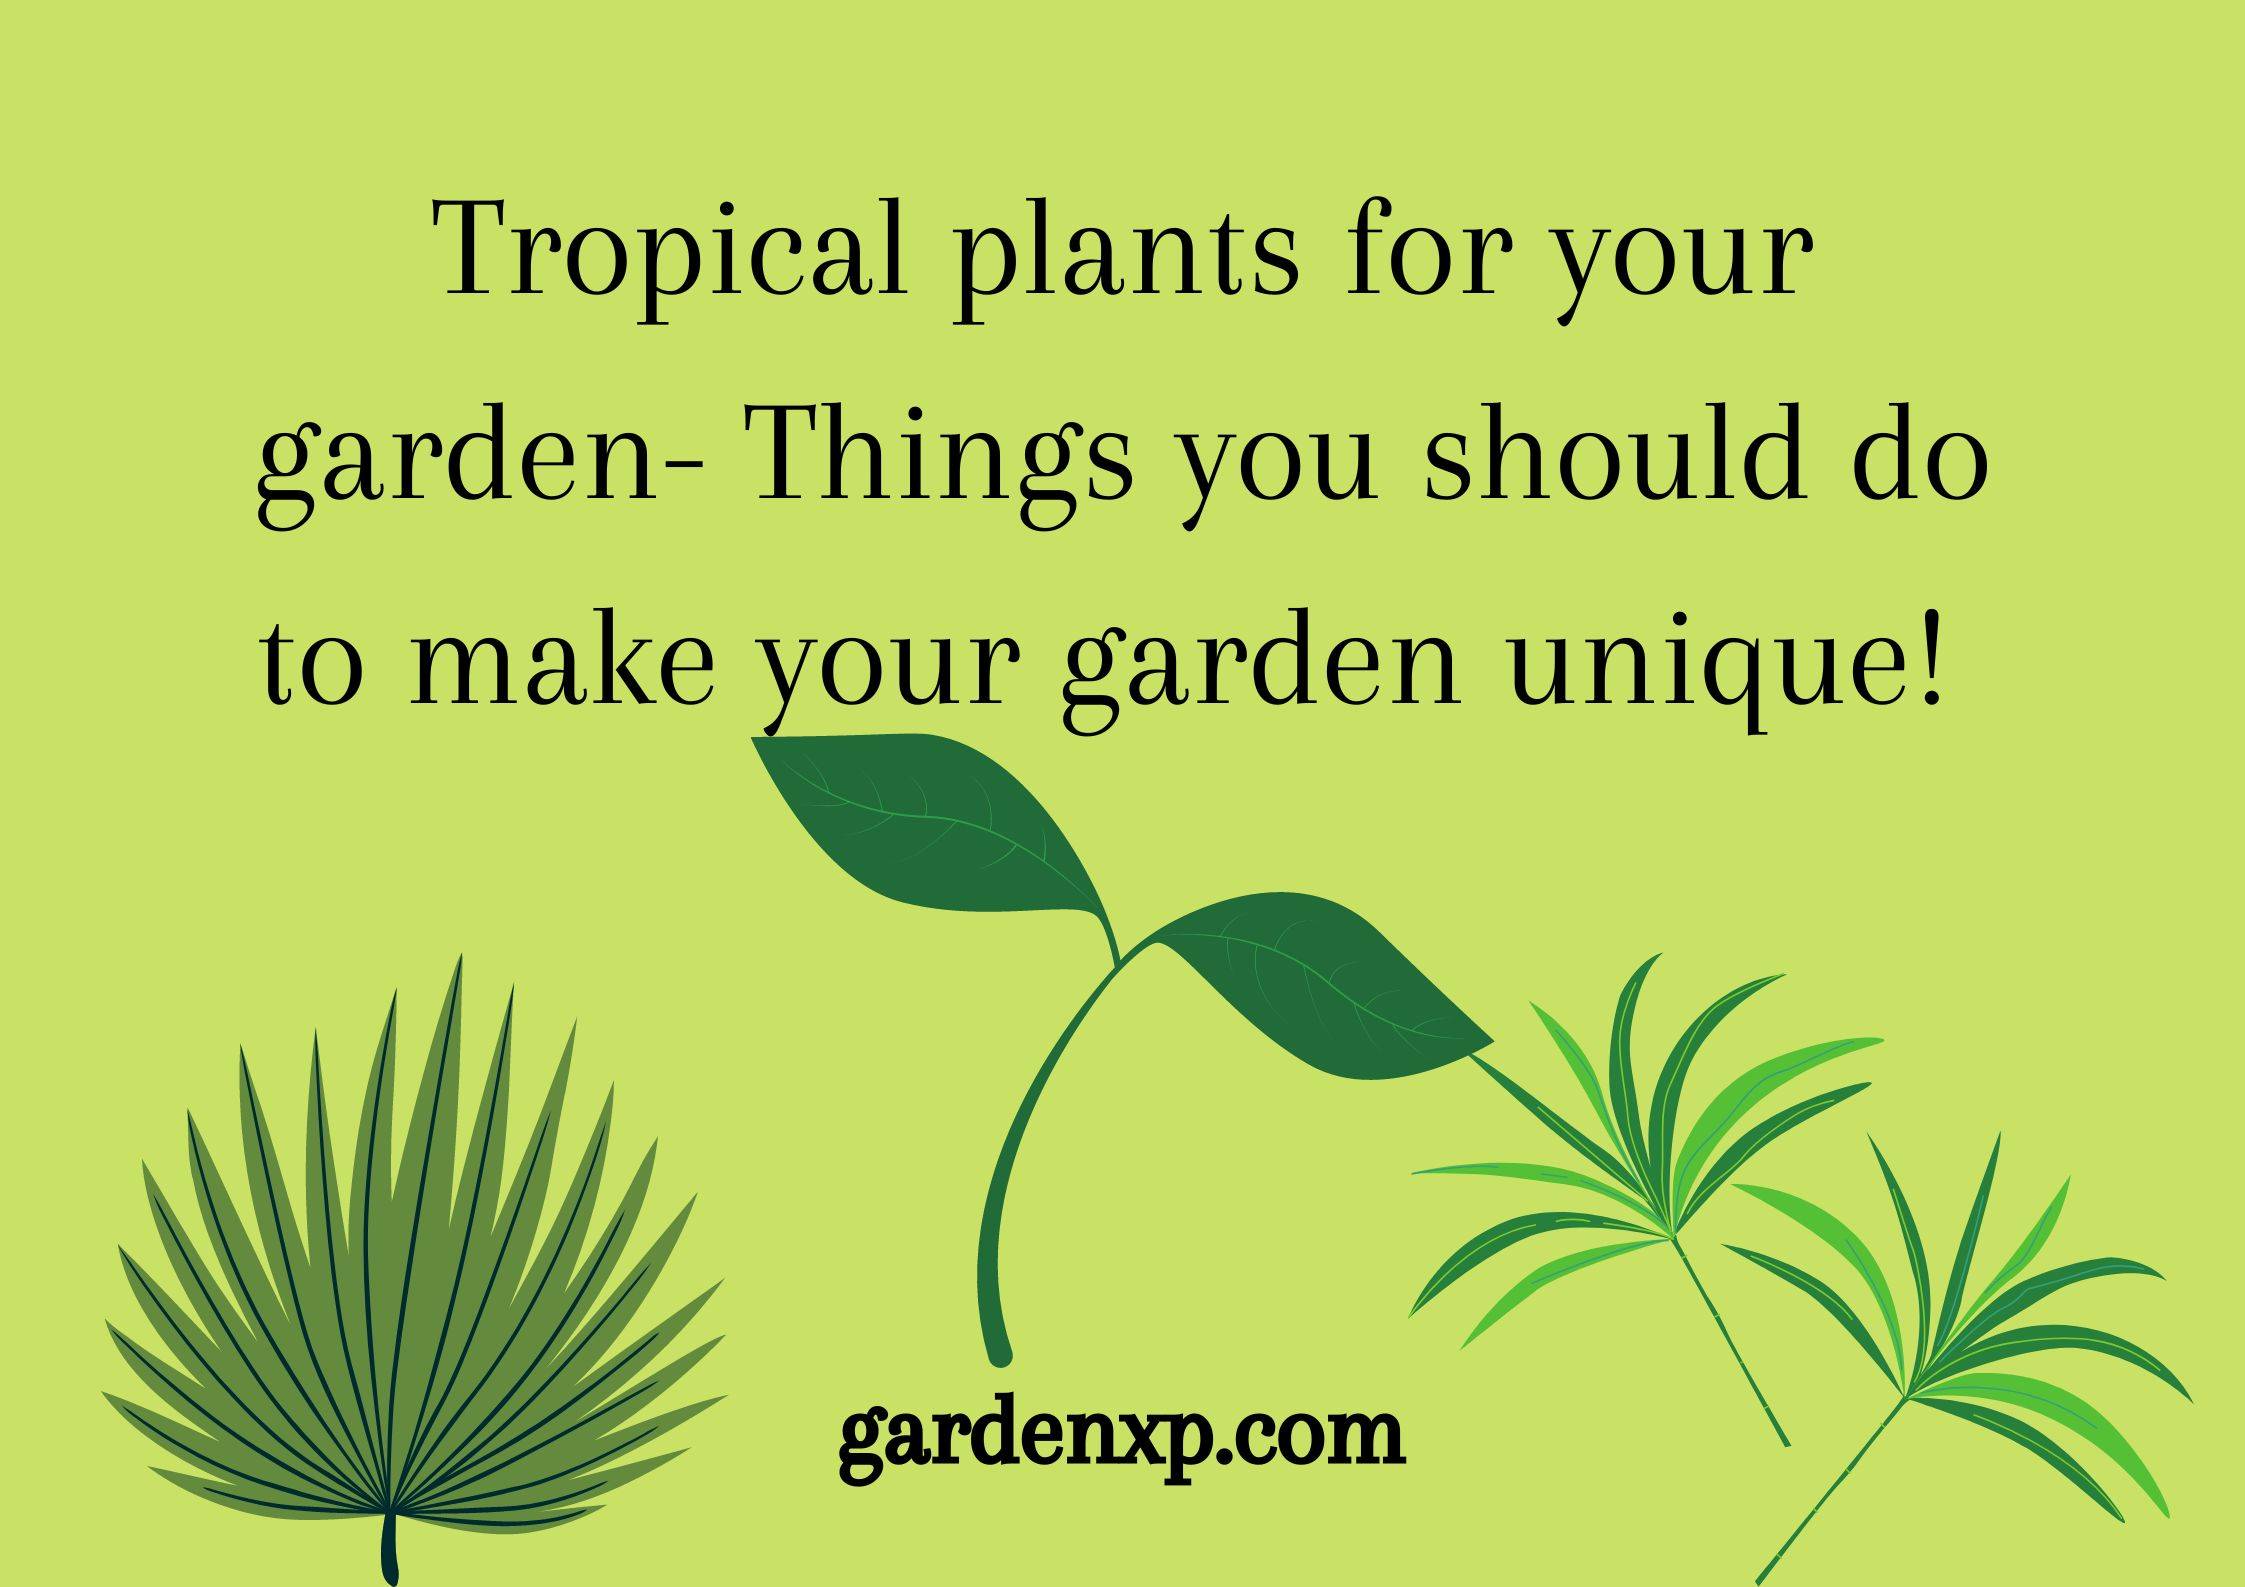 Tropical Plants for shade - How to Create a Dense Tropical Garden for Shade